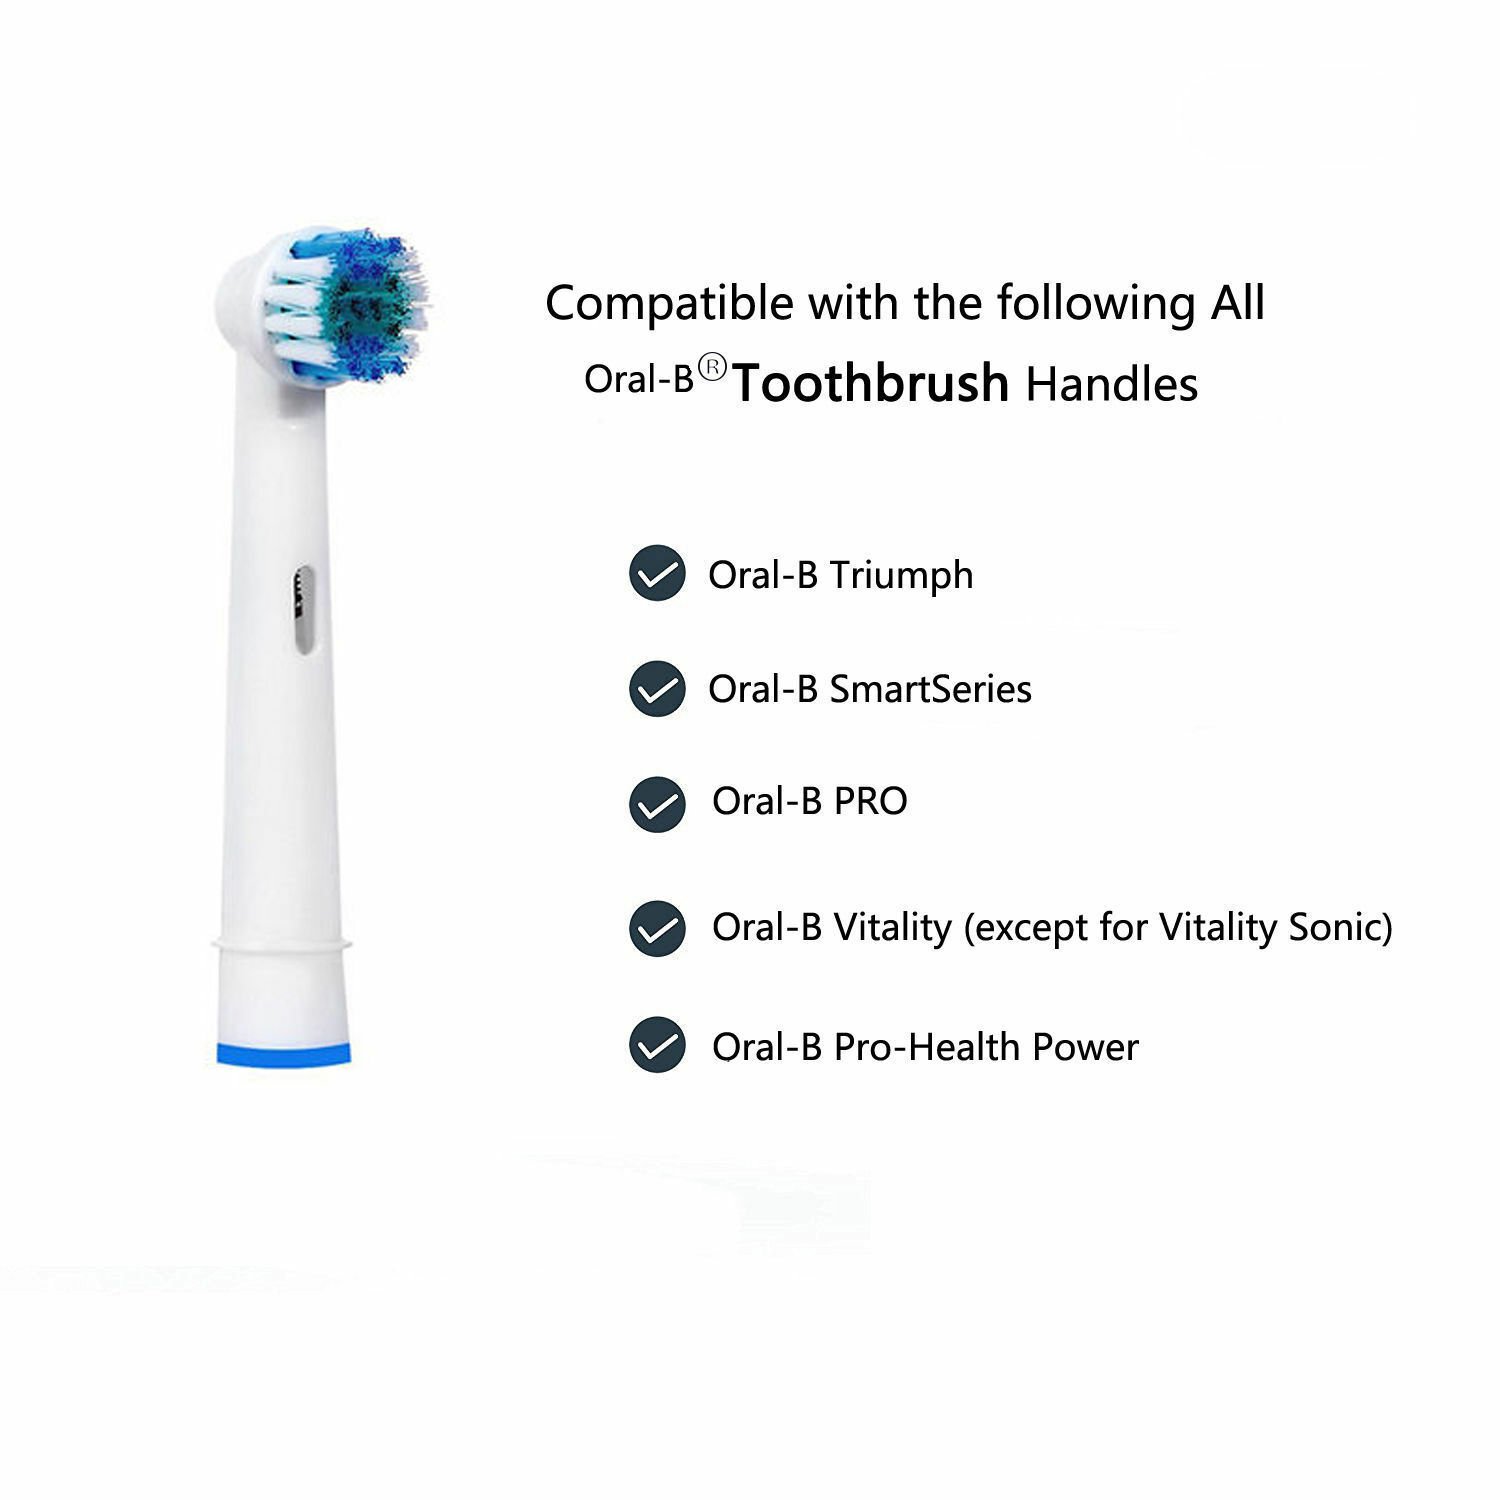 Genkent Electric Toothbrush Replacement Tooth Brush Heads Fit For Oral B Braun PRECISION CLEAN, Christmas Gifts Set for Men Women, 32 Pcs, Christmas Gifts